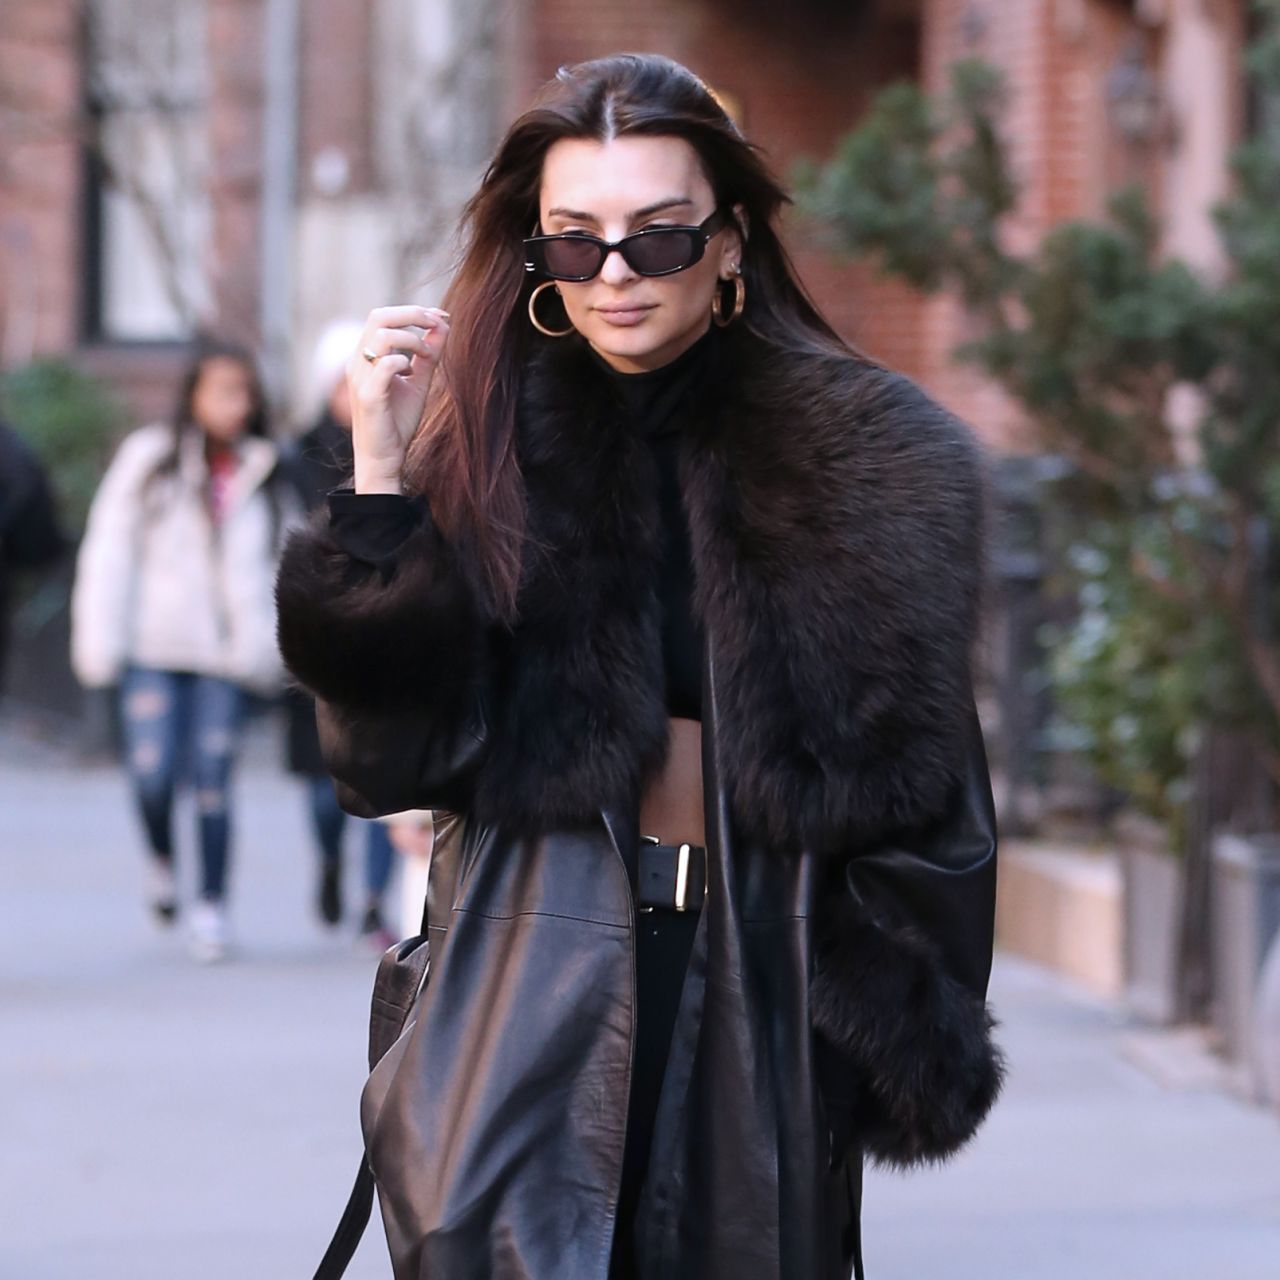 Emily Ratajkowski in a Crop Top, Pants and Leather Coat in New York ...